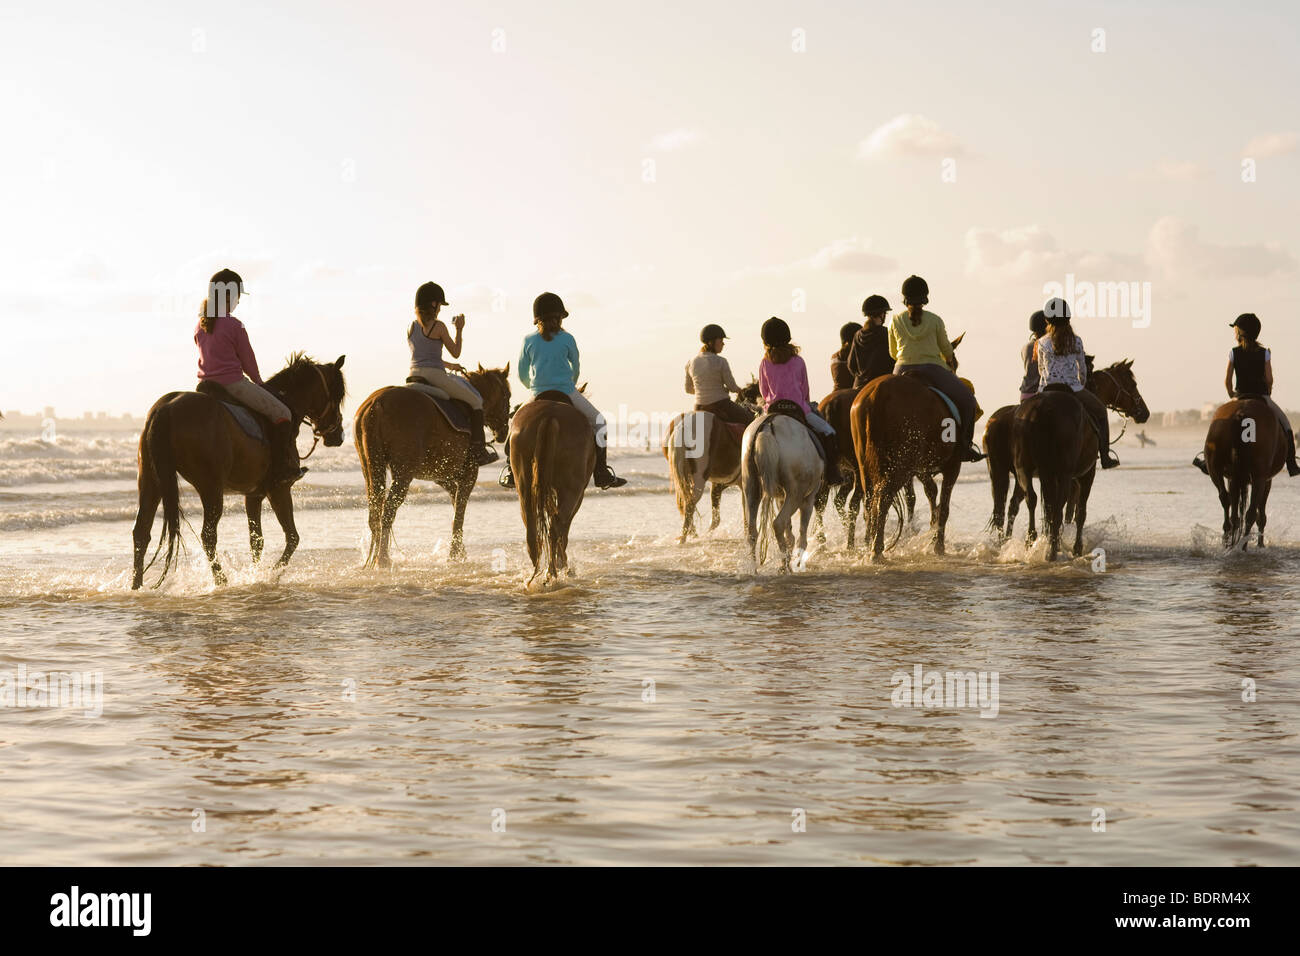 A horse riding school goes for a hack on the beach and in the surf. Riders are of all different ages and abilities. Stock Photo